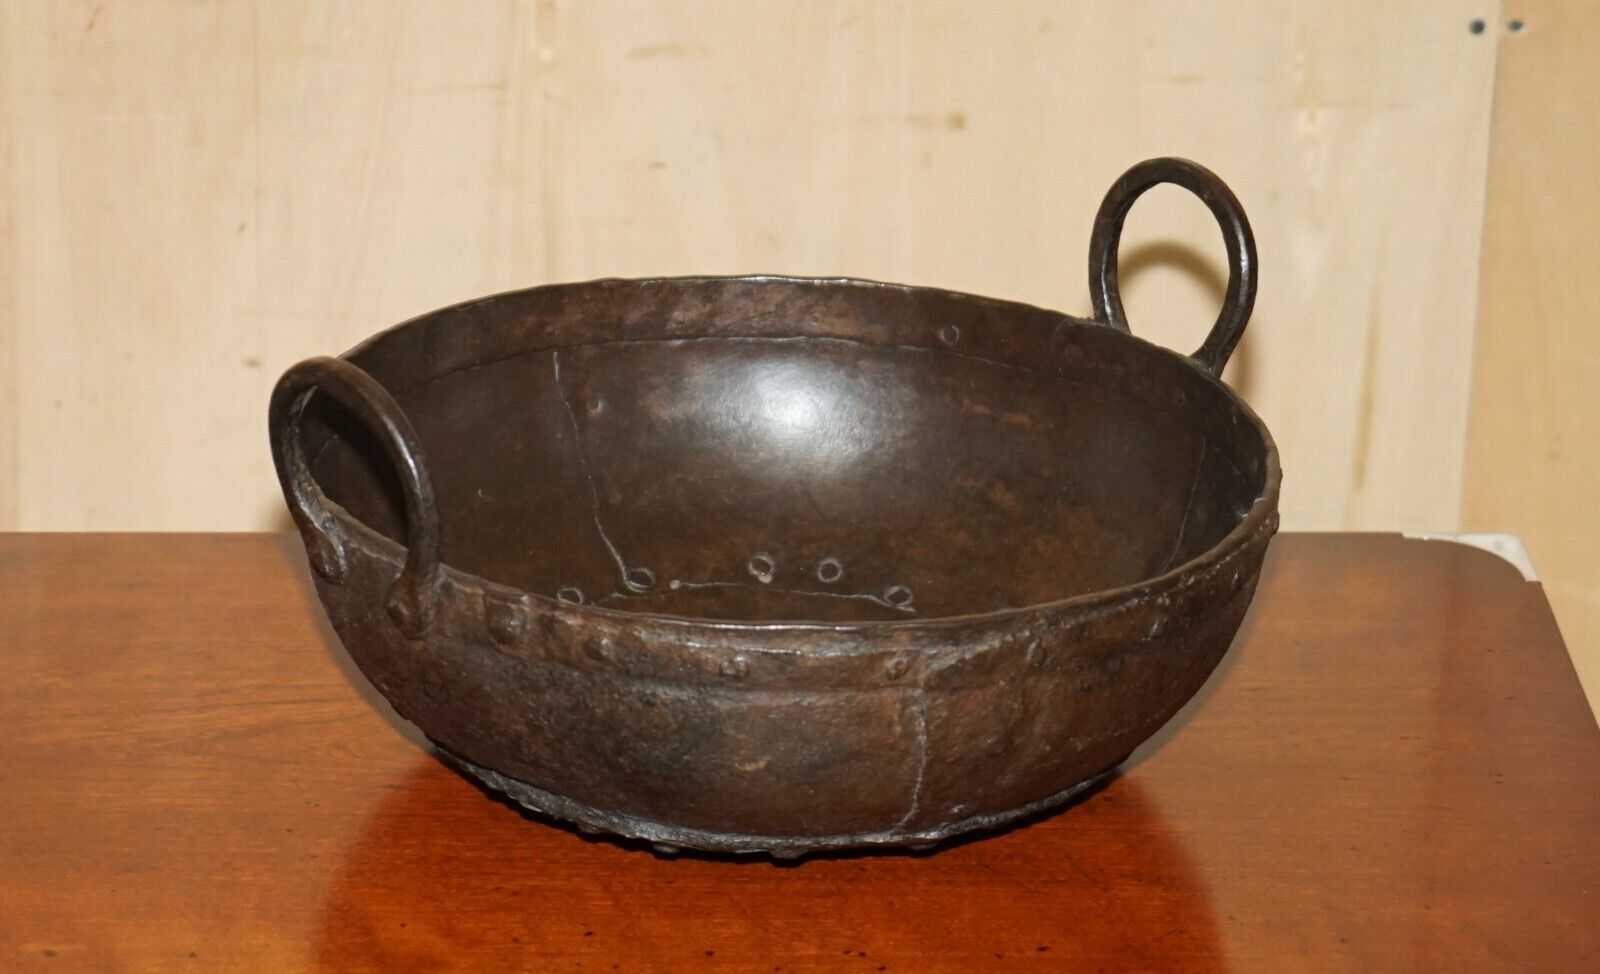 STUNNING ANTIQUE SUPER DECORATIVE HAND HAMMERED BOWL IDEAL FOR FRUIT OR BBQ